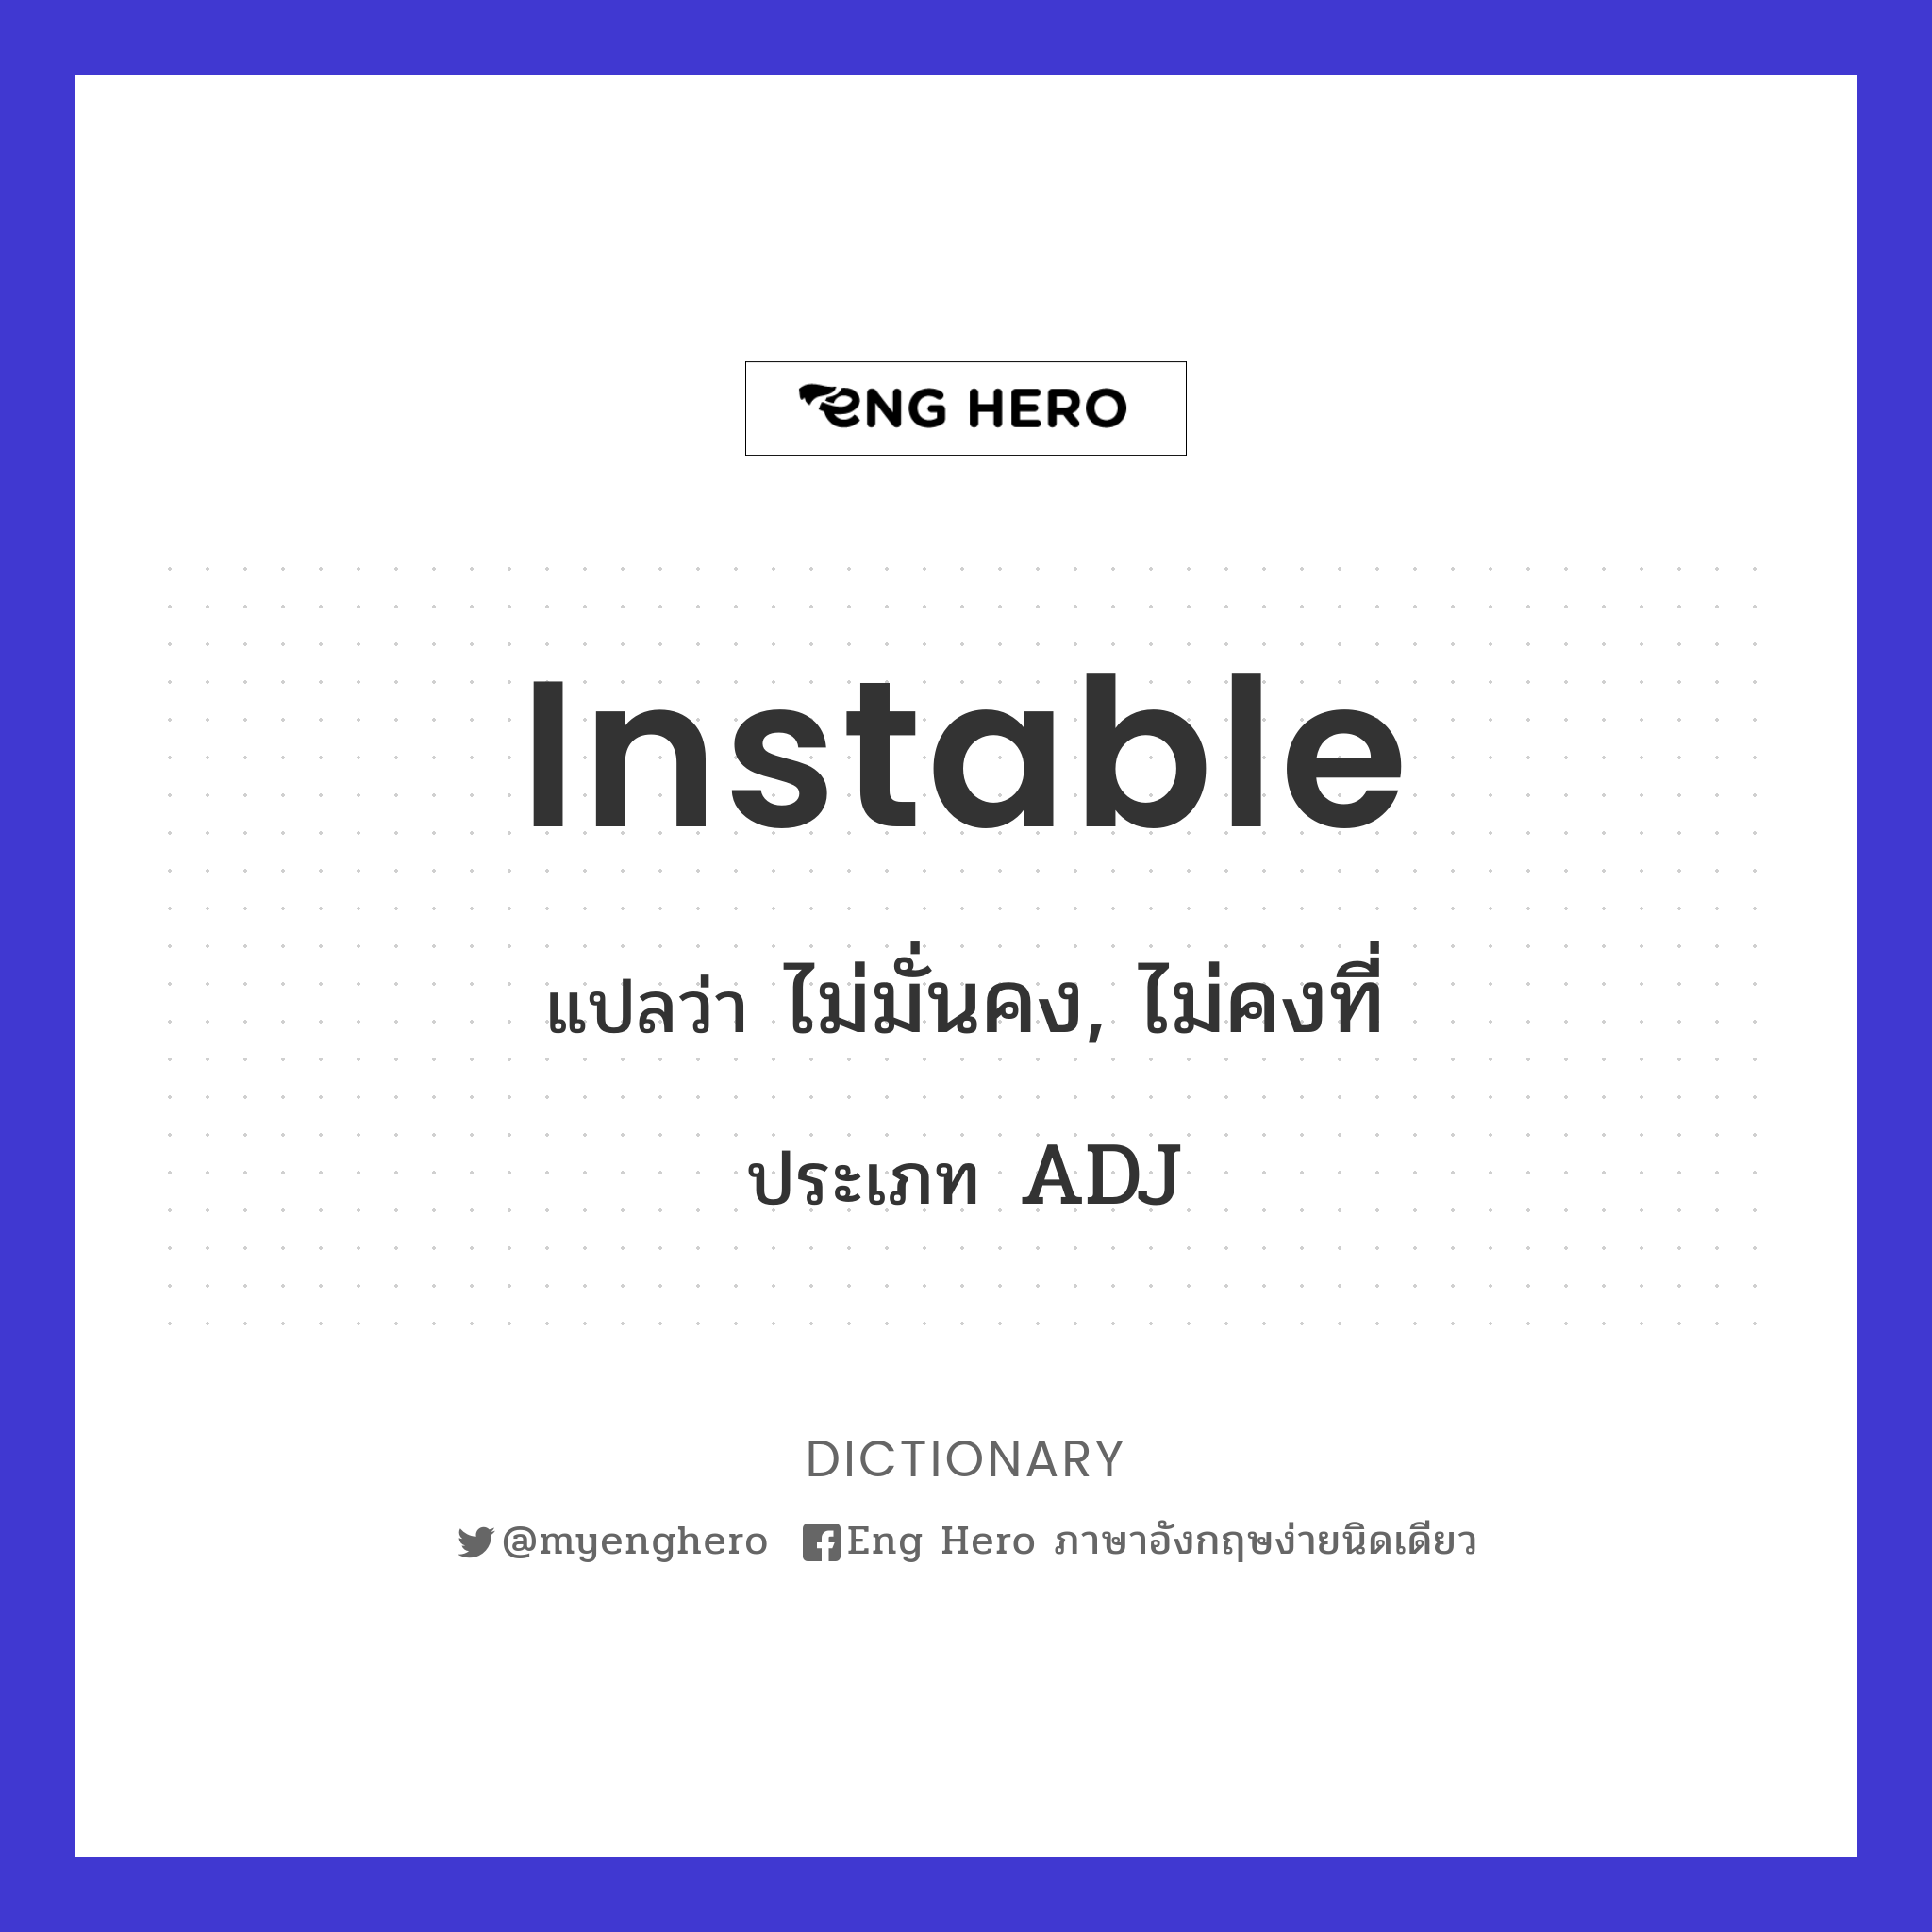 instable